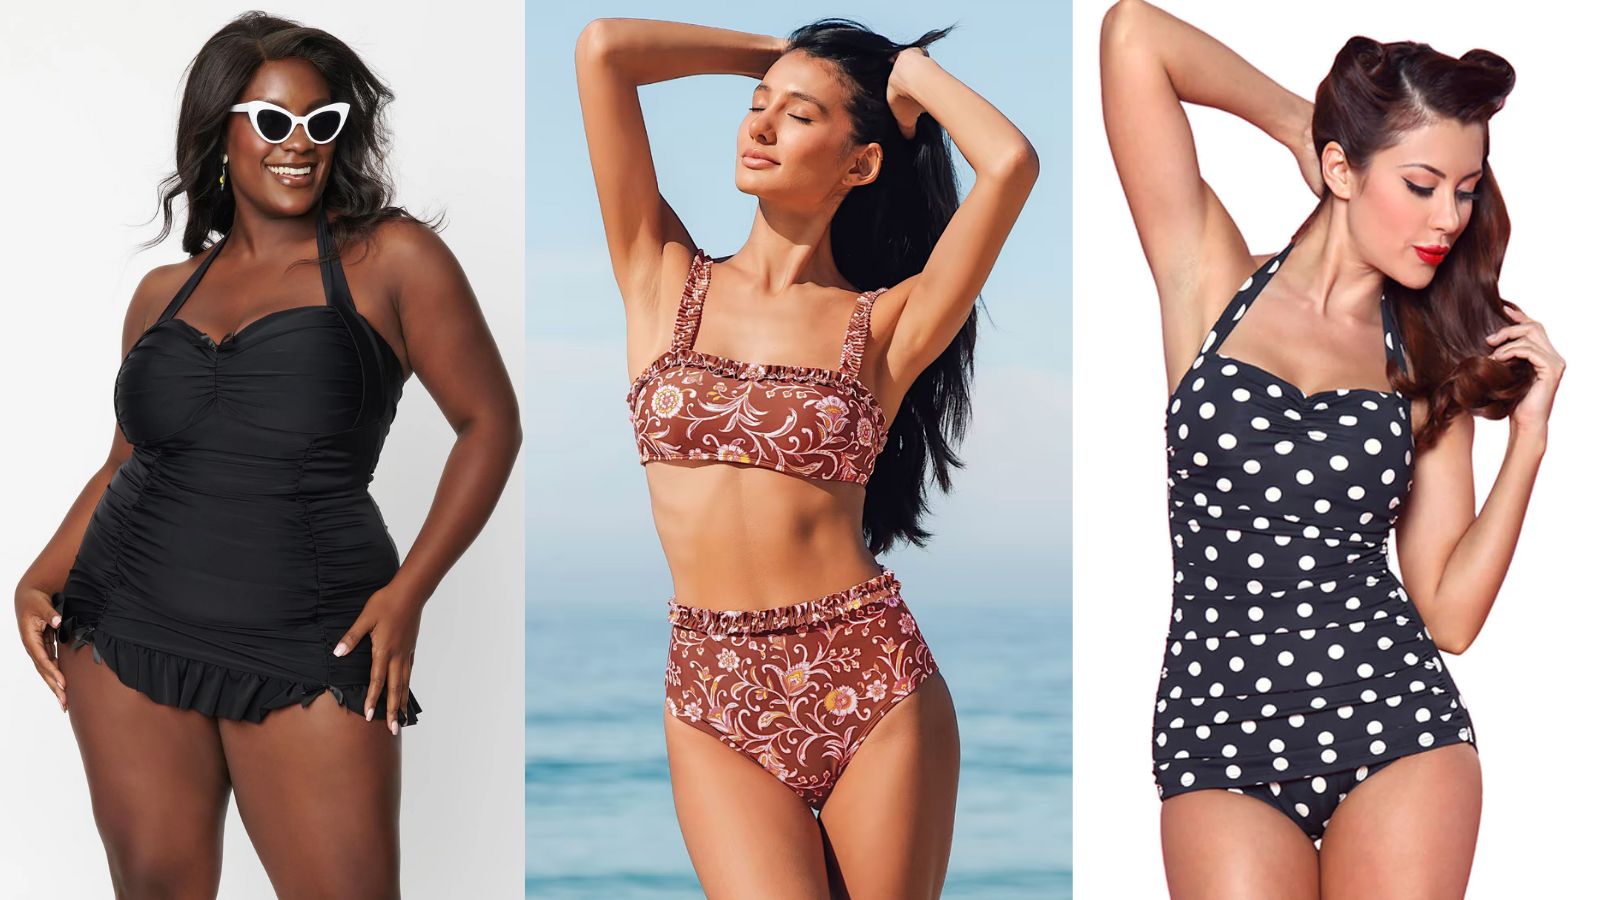 14 vintage swimsuits that deliver curve-loving style